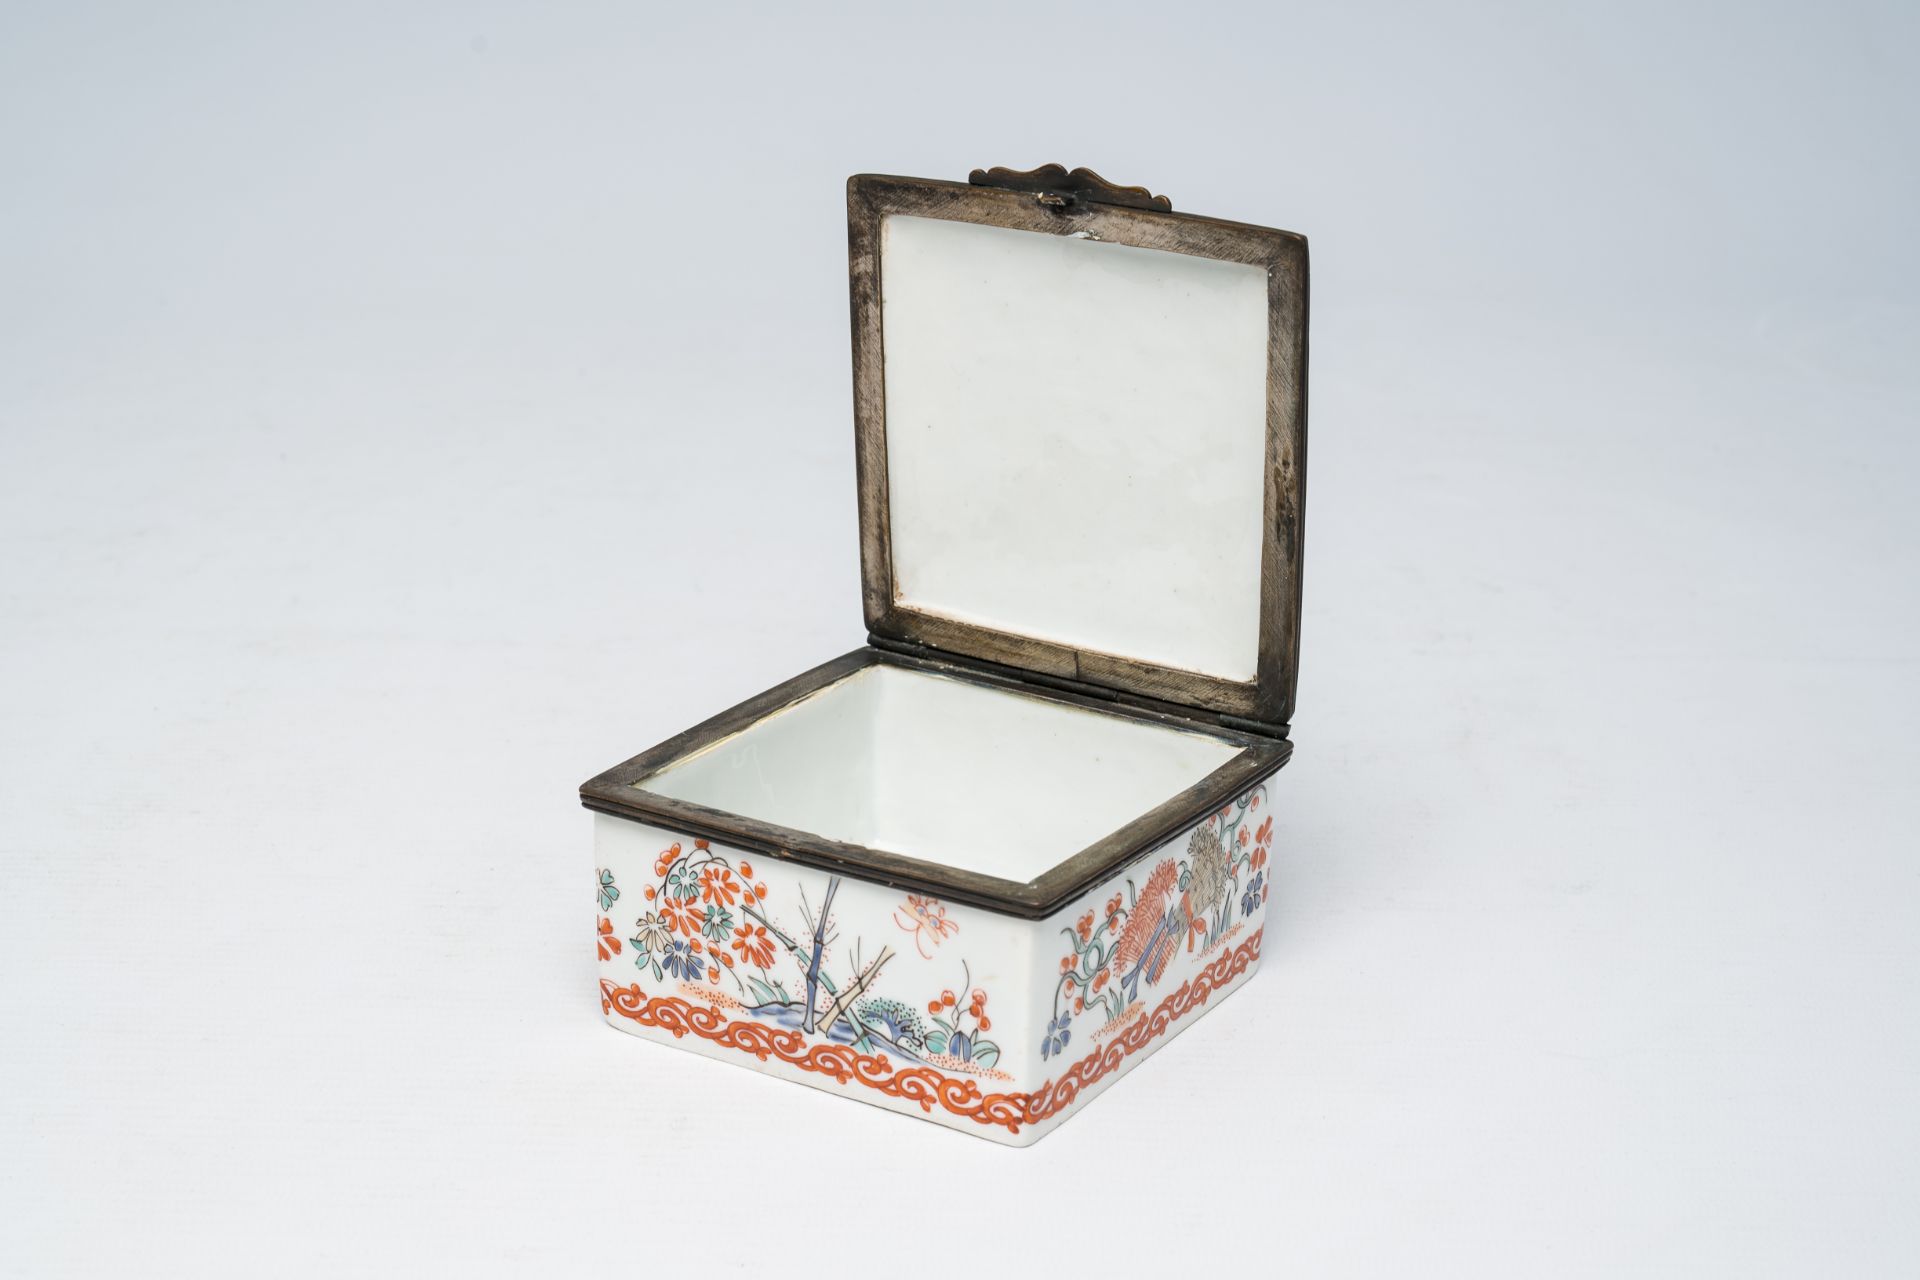 A French Samson Chantilly style box and cover with Kakiemon style floral design, Paris, 19th C. - Image 2 of 8